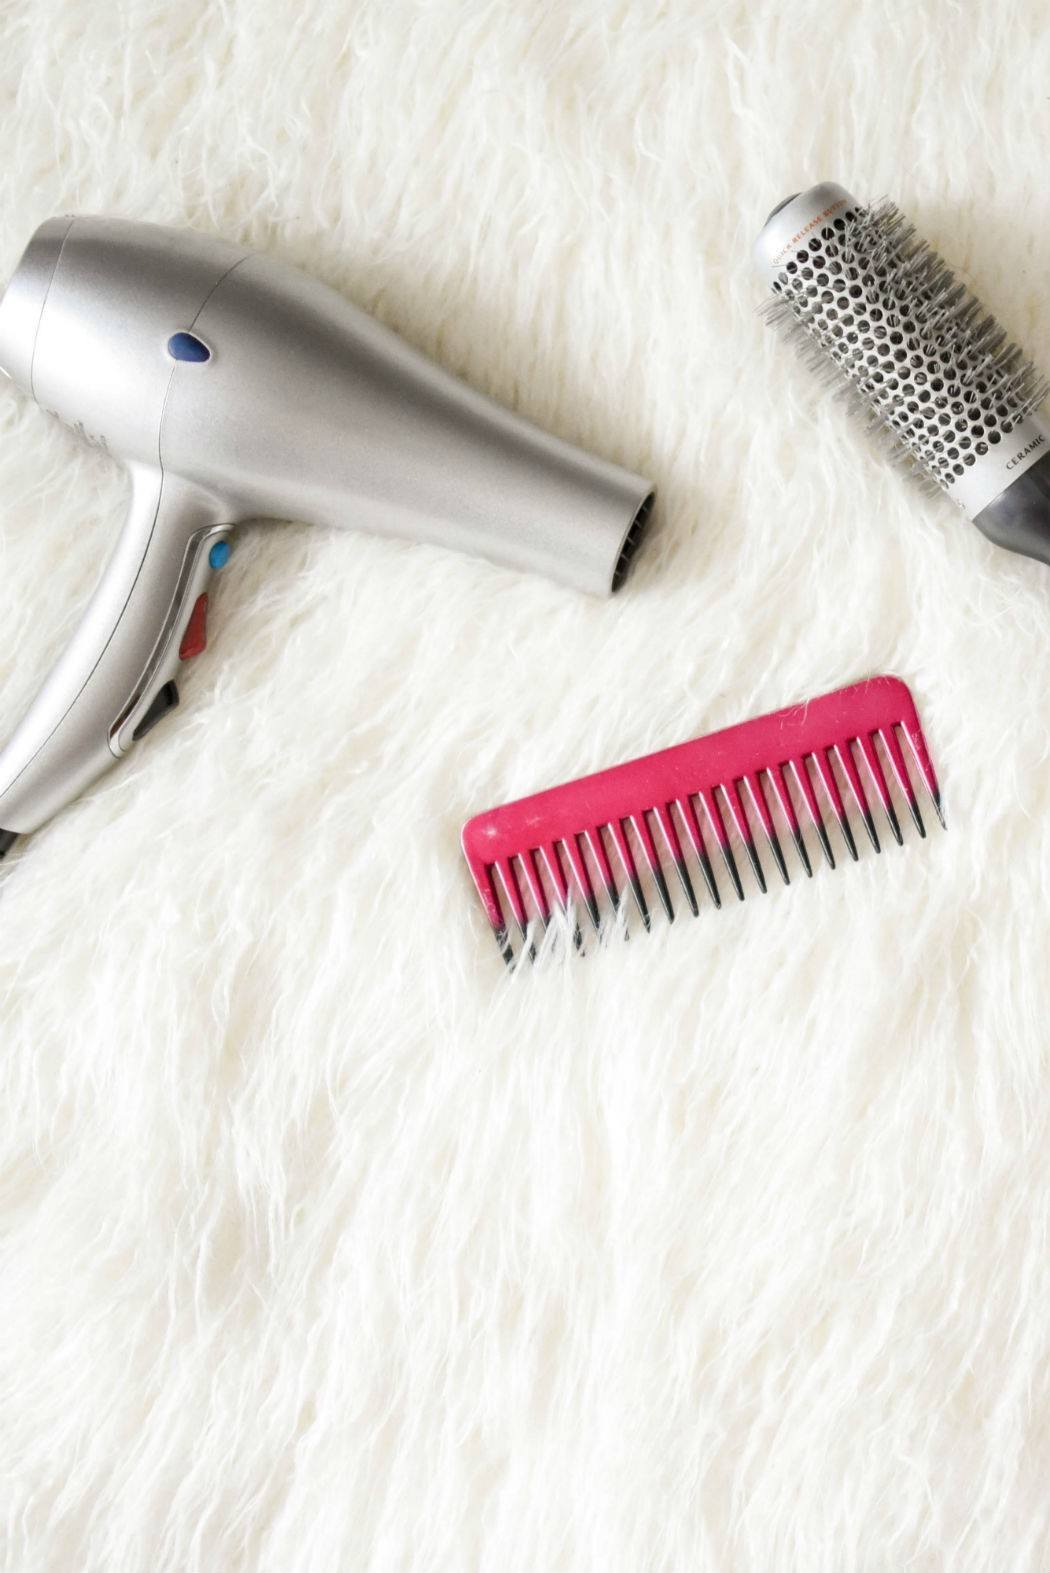 hair dryer, blow dry brush and pink comb on a white shaggy carpet